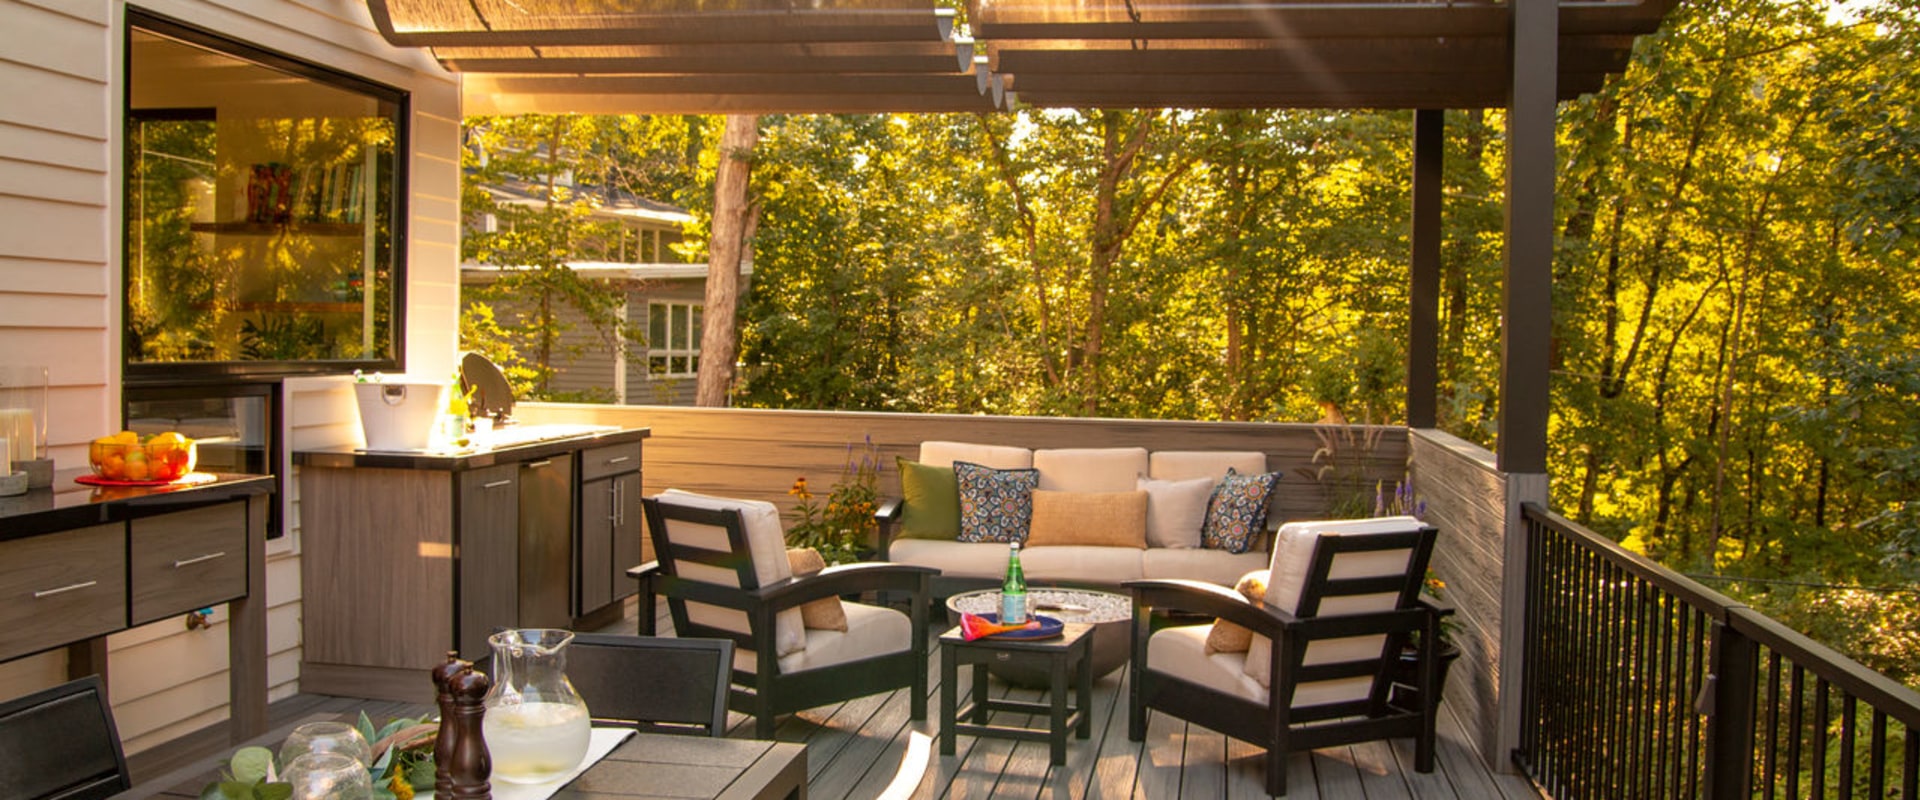 Improve Your Home with a Deck or Patio